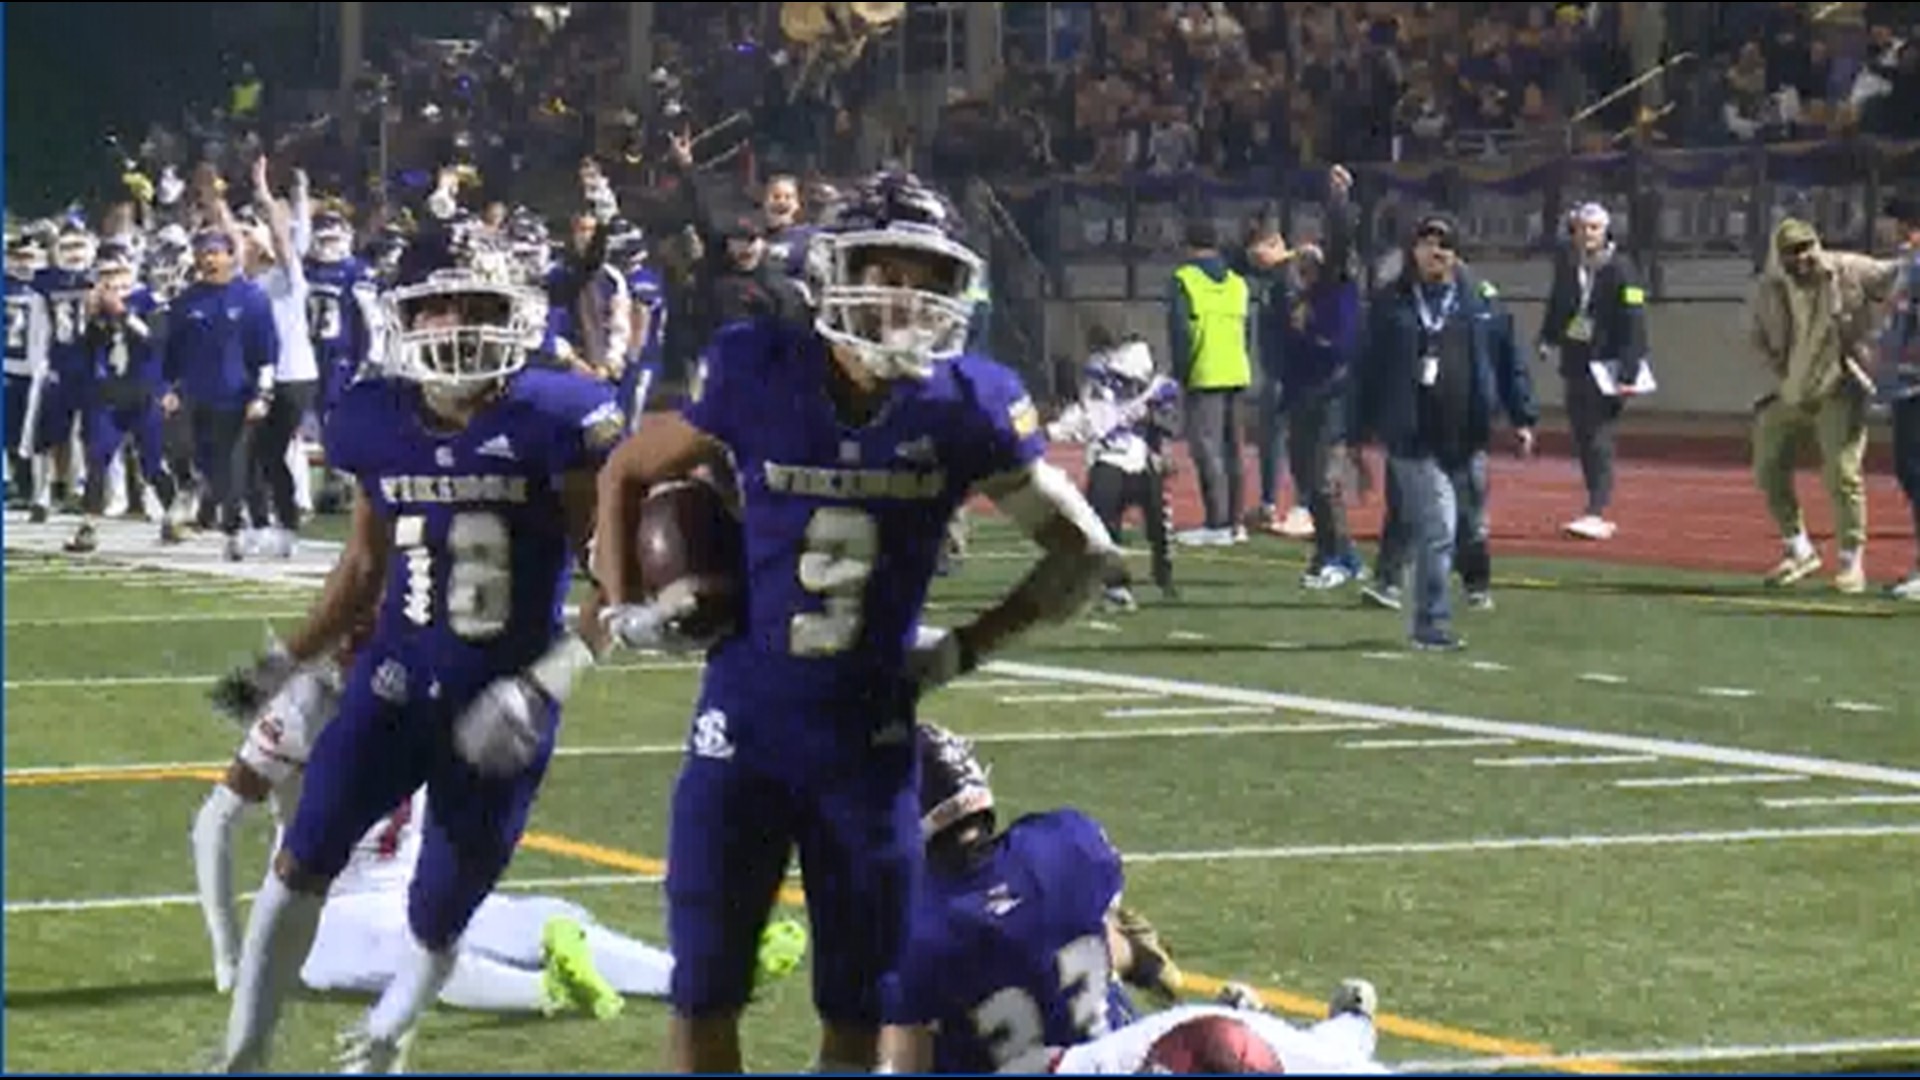 Highlights of Lake Stevens' 44-21 quarterfinal win over Kennedy Catholic in the State playoffs